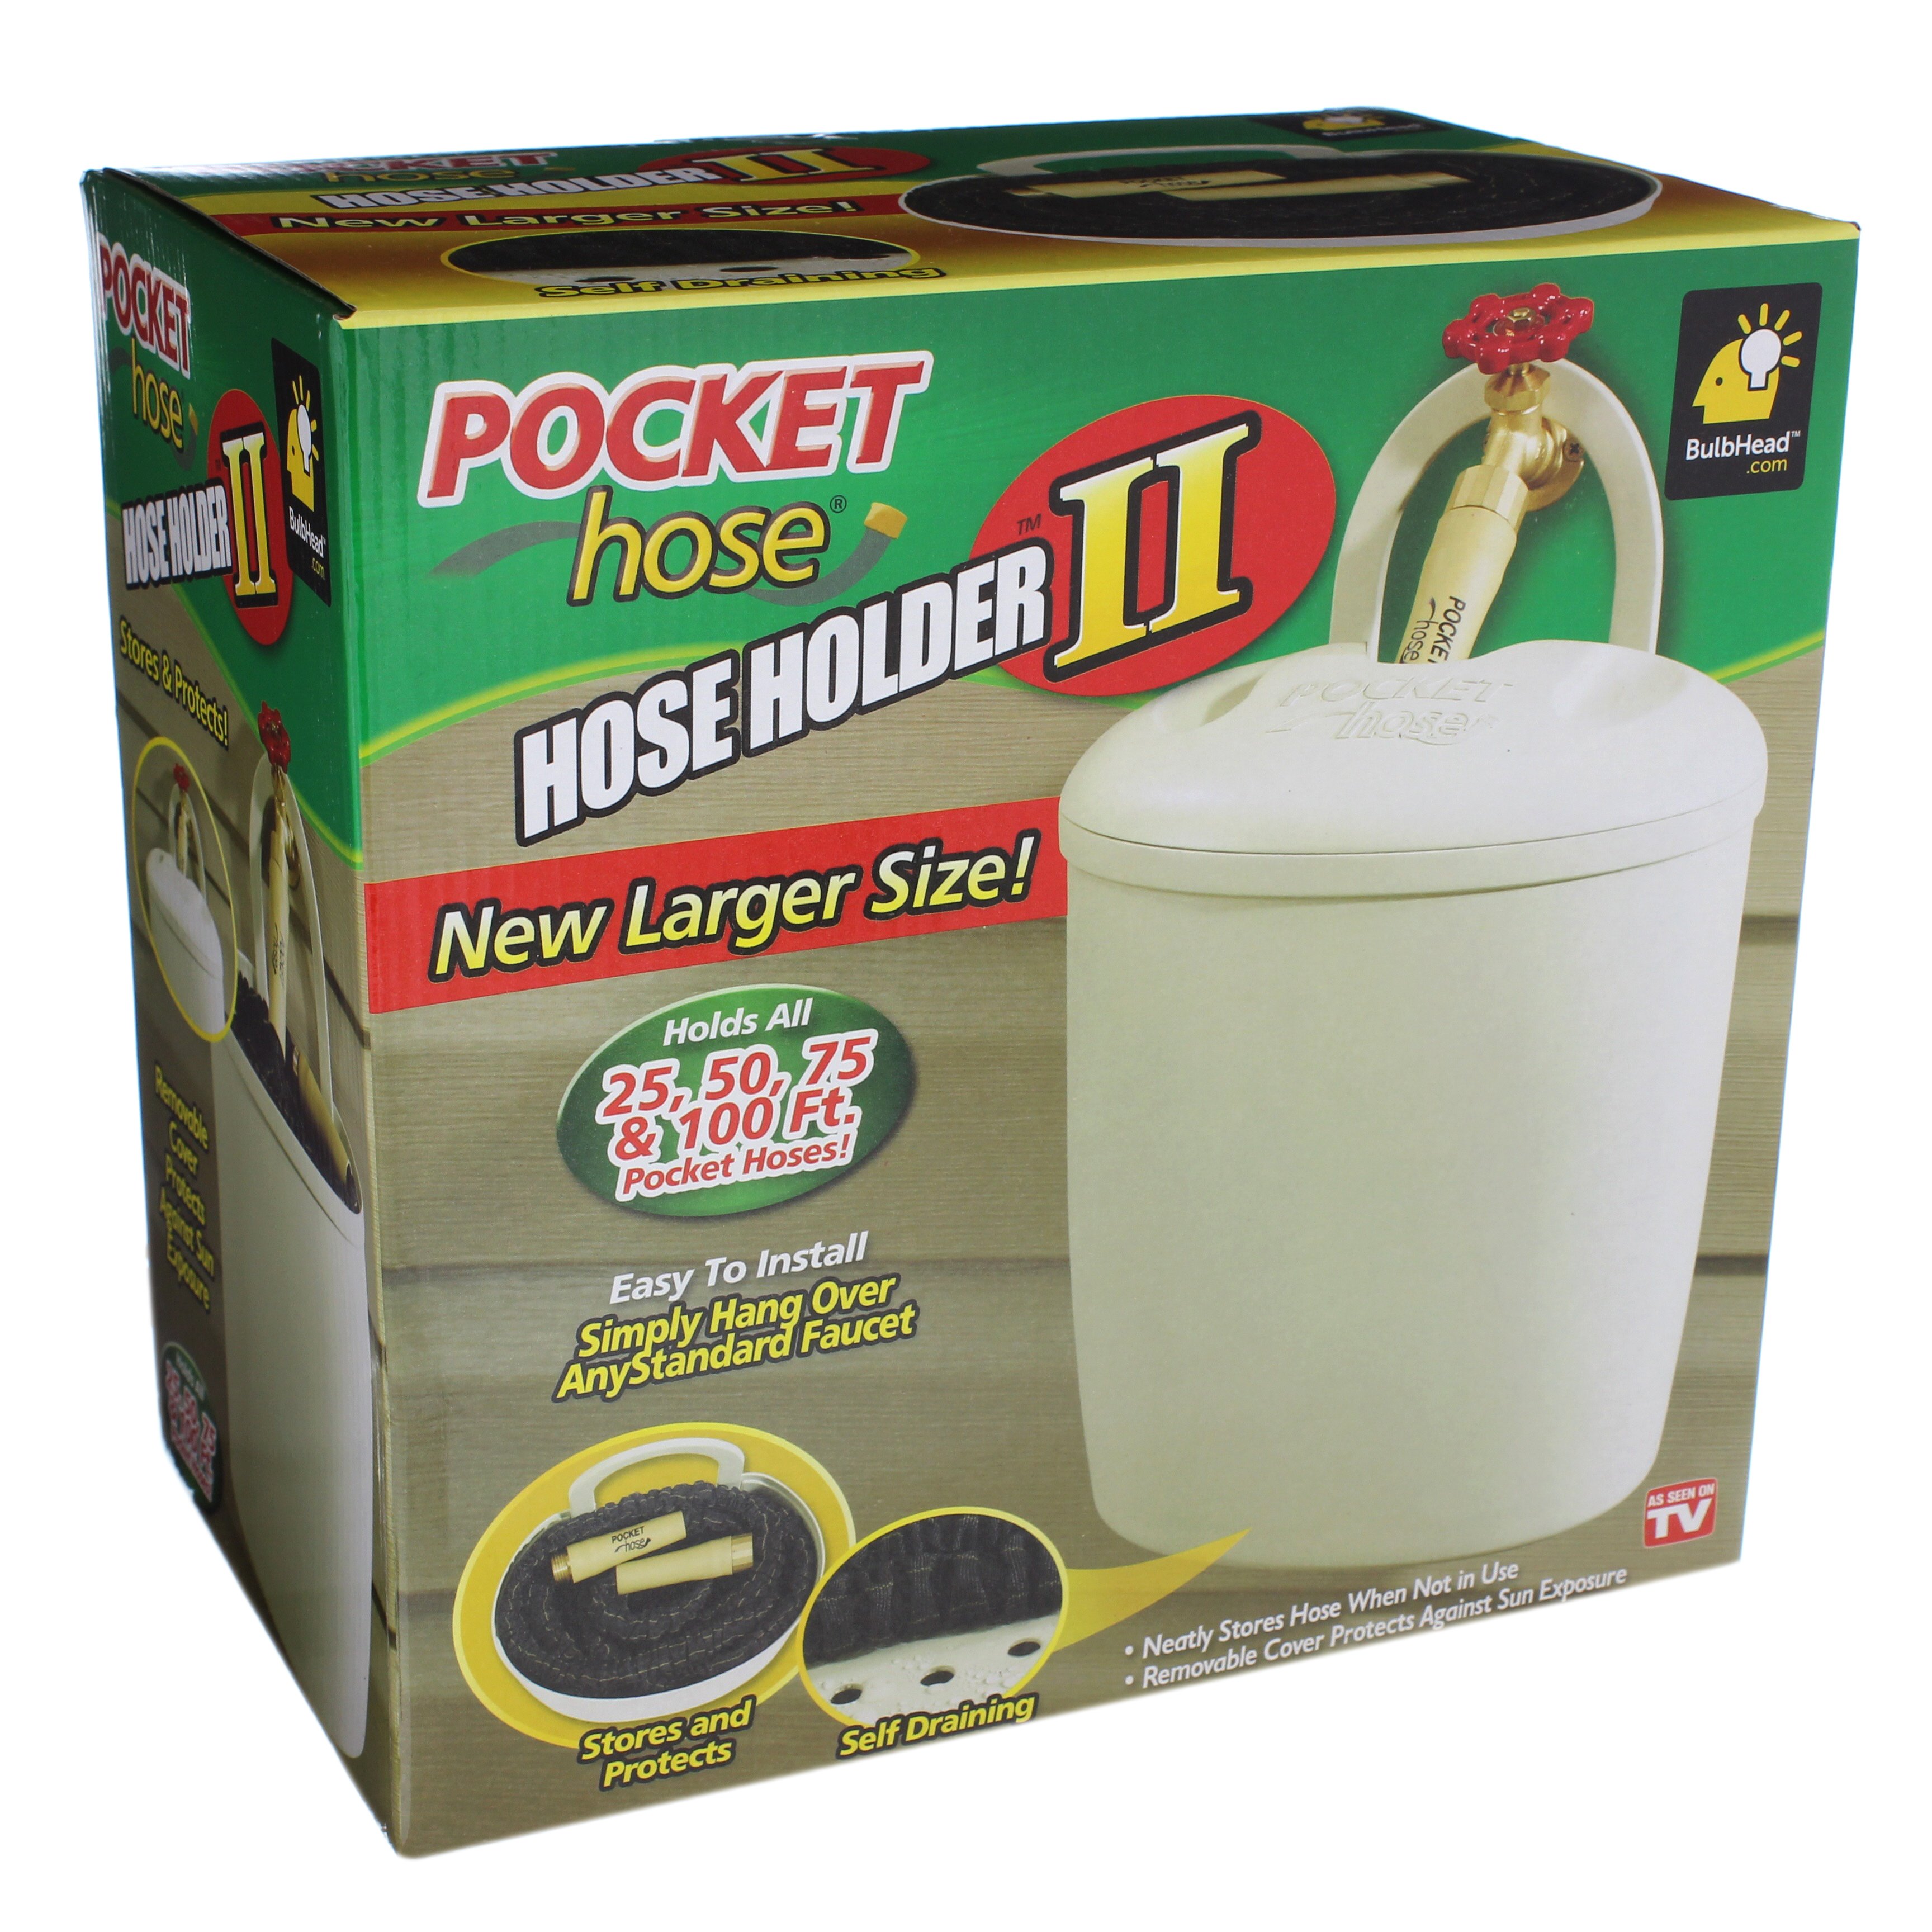 As Seen On TV Pocket Hose Holder II - Shop Hoses & Watering at H-E-B